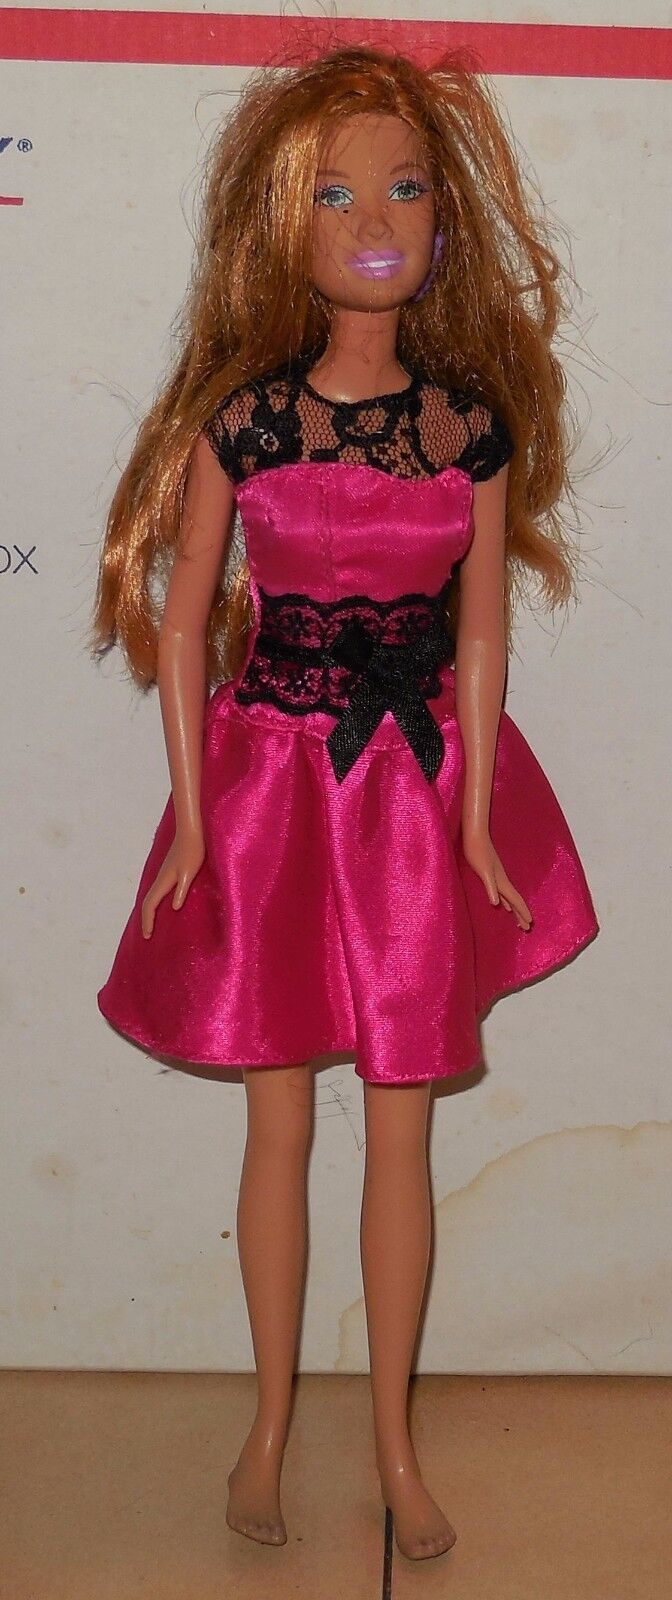 Primary image for Mattel Barbie doll #18